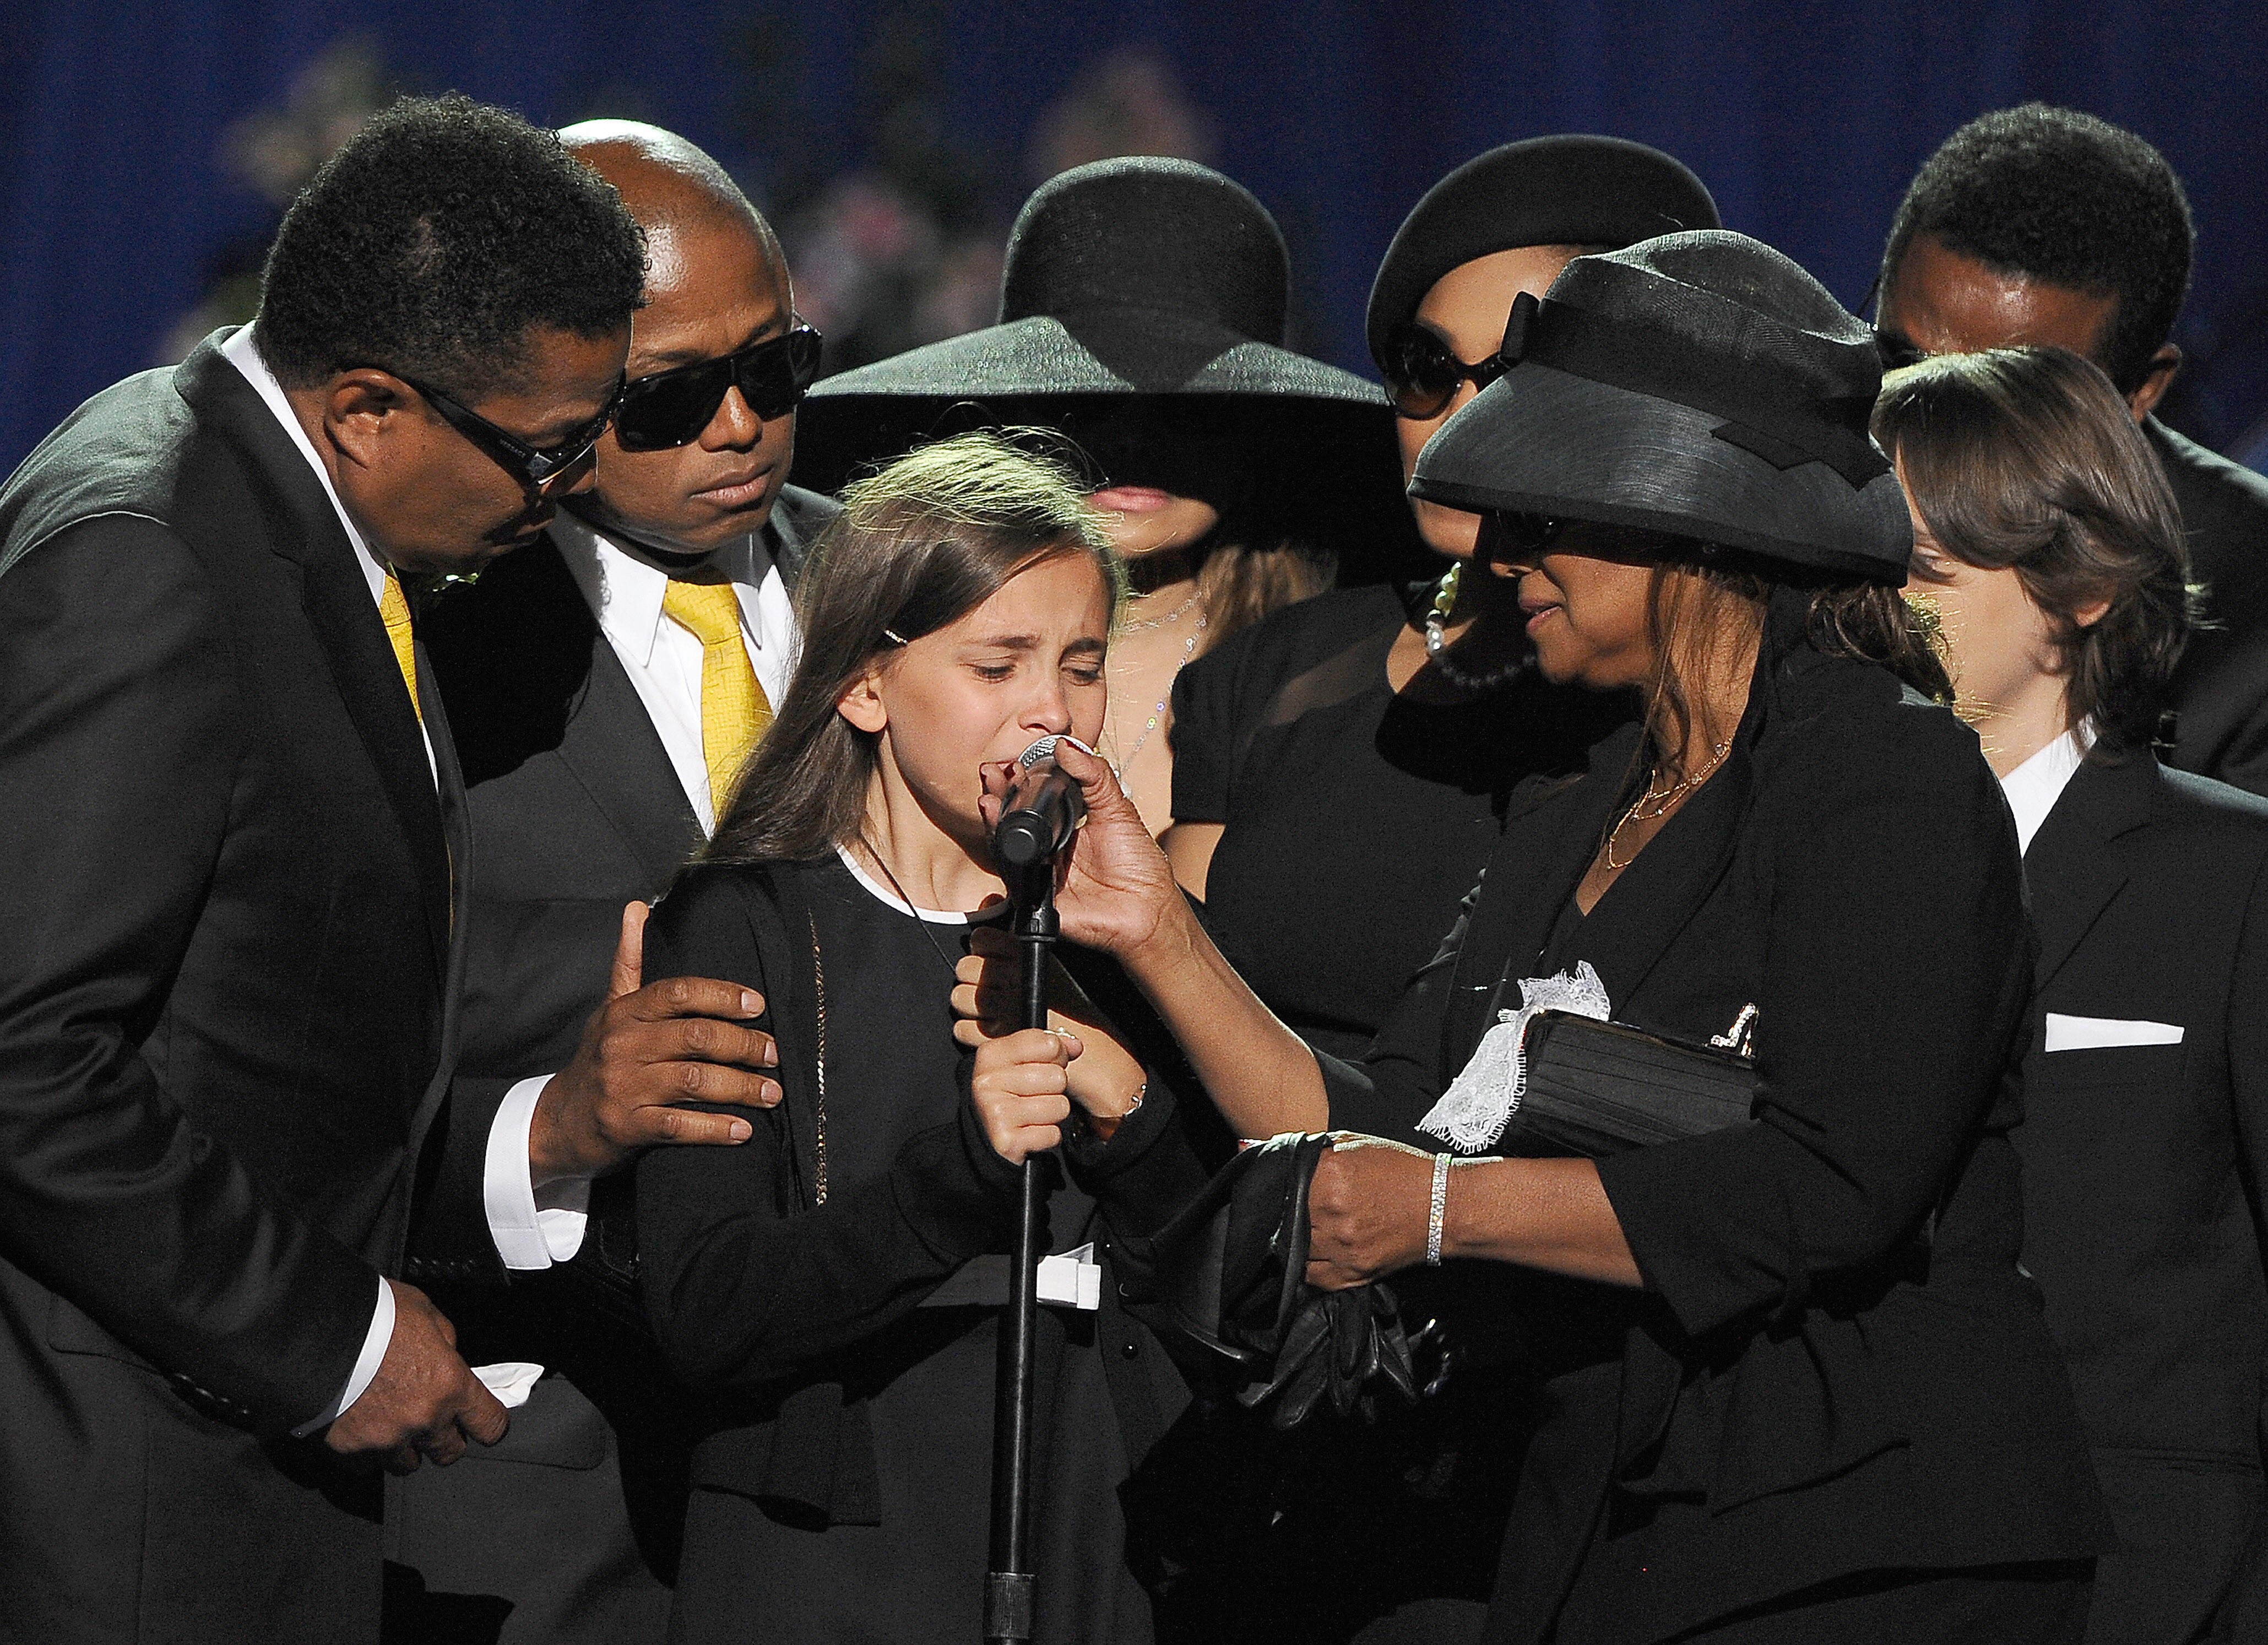 Paris Michael Katherine Jackson (C) is comforted by the brothers and sisters of Michael Jackson including Marlon (L) and Randy (2nd L) Jackson at the memorial service for the King of Pop at the Staples Center in Los Angeles on July 7, 2009 | Source: Getty Images 